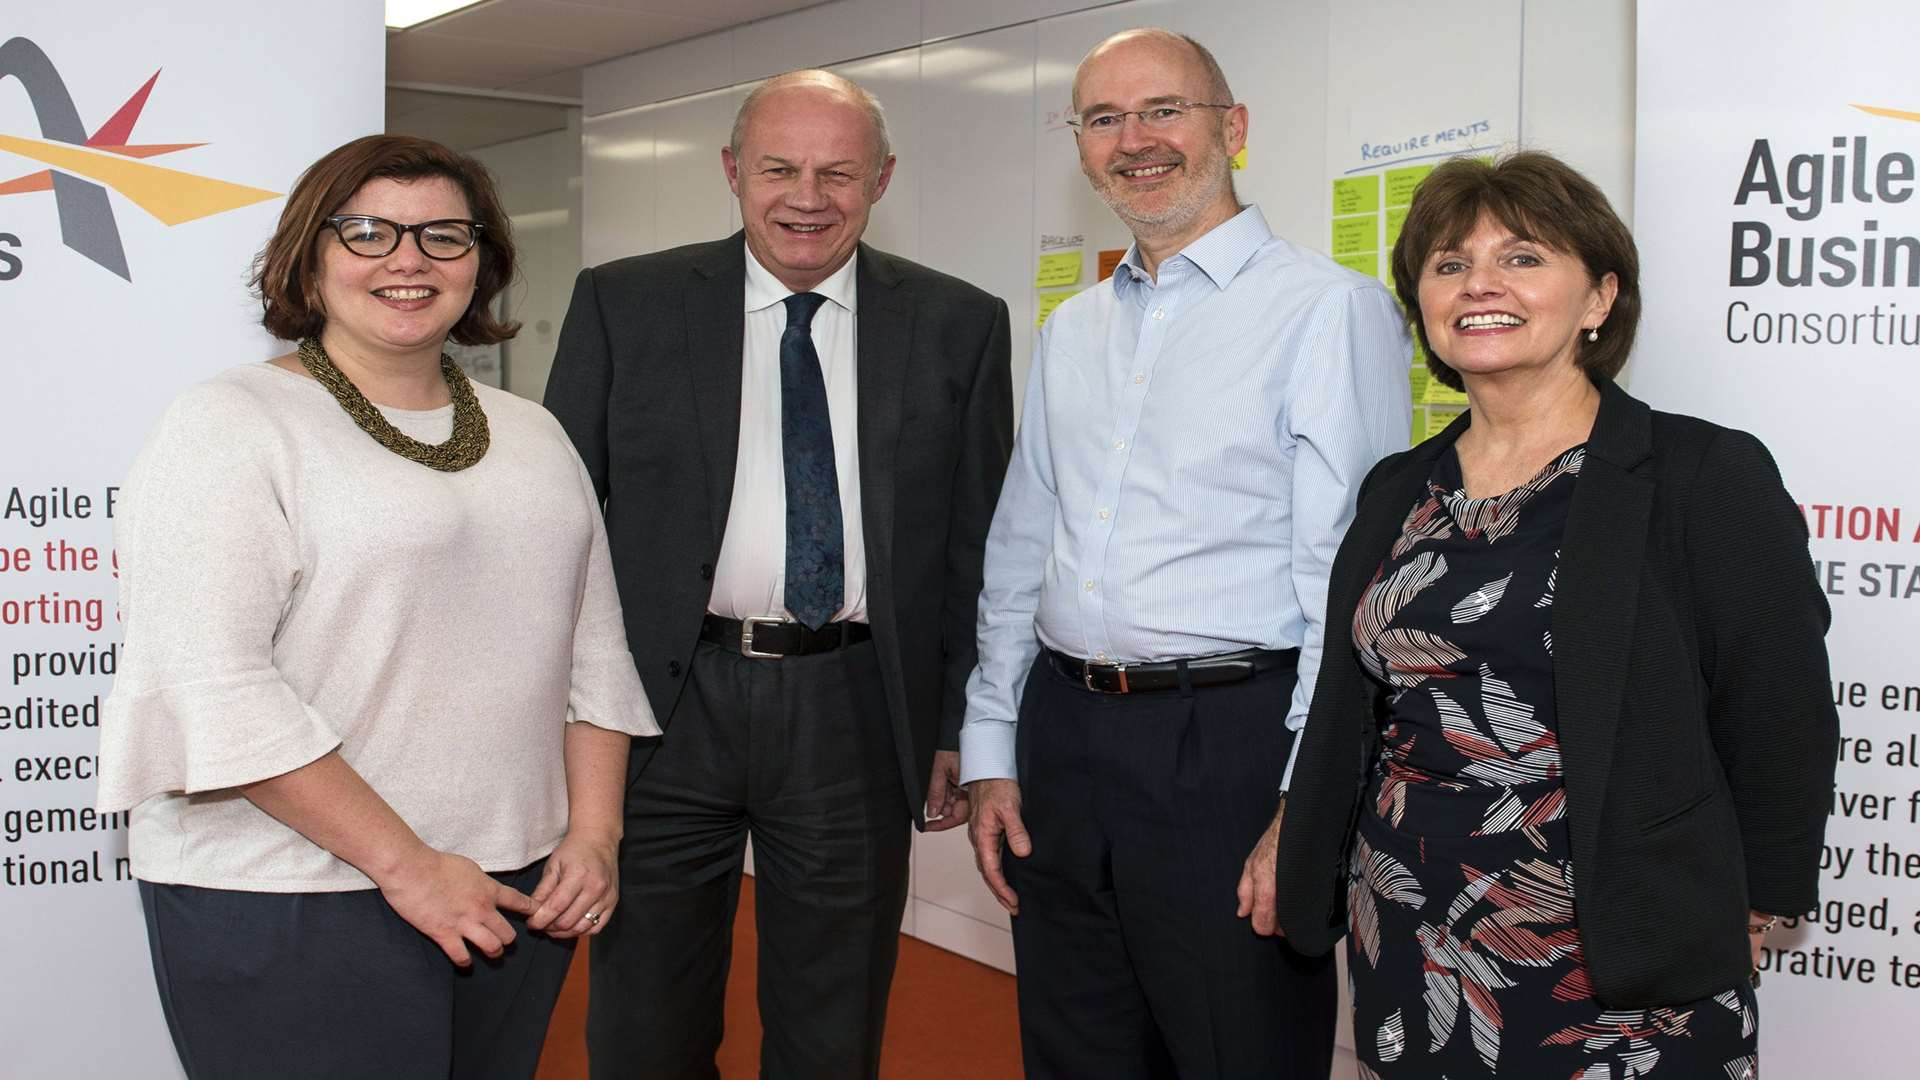 From left, Agile marketing and relationships manager Tamsin Fox-Davies, Damian Green MP, Agile chair Geof Ellingham and chief executive Mary Henson